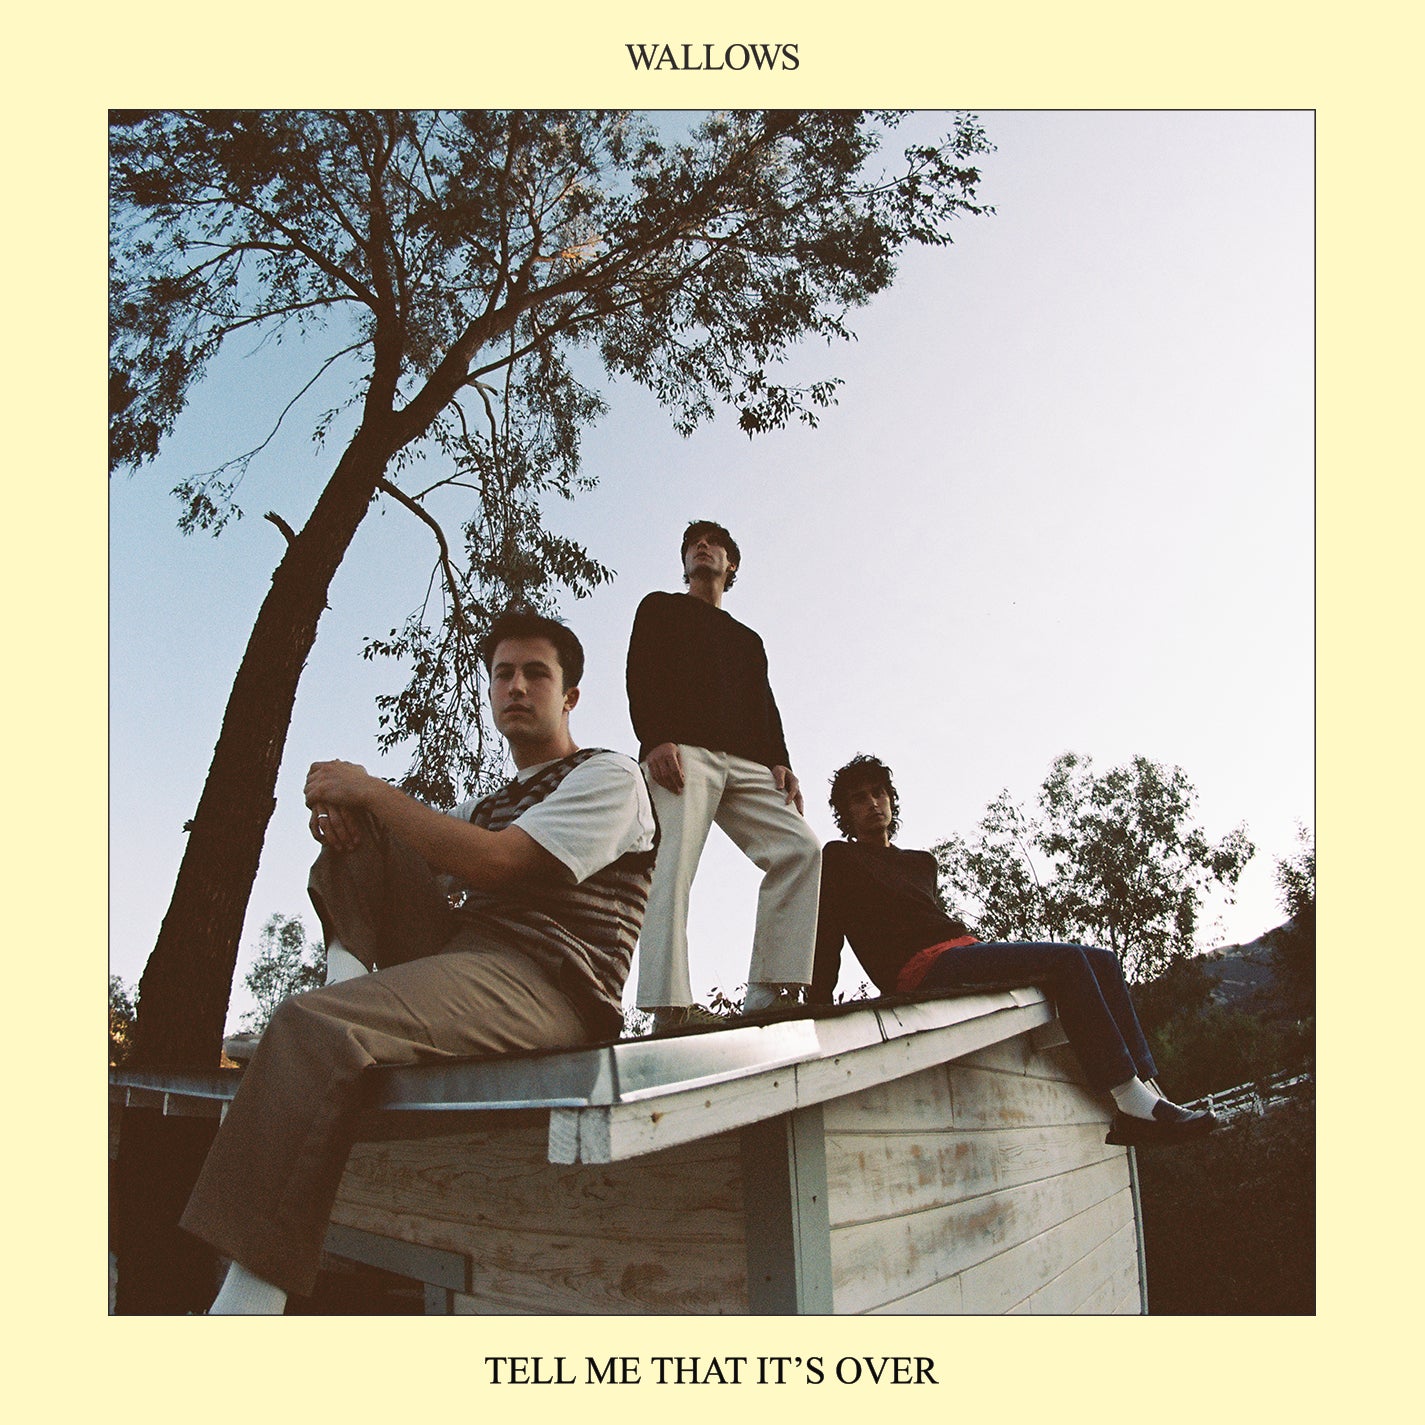 WALLOWS - TELL ME THAT IT'S OVER Vinyl LP